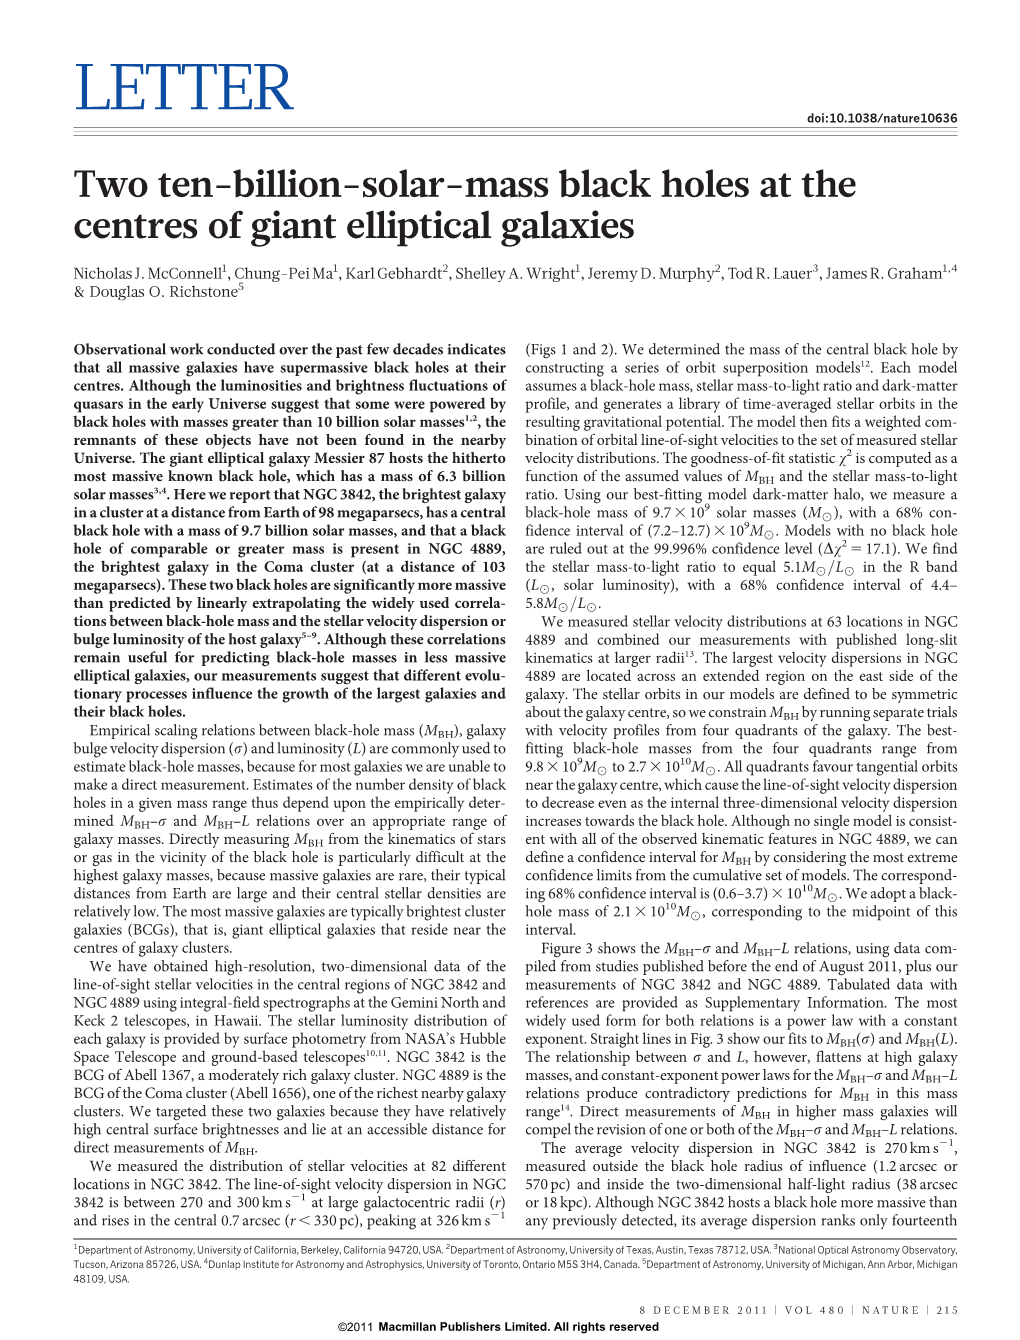 Two Ten-Billion-Solar-Mass Black Holes at the Centres of Giant Elliptical Galaxies